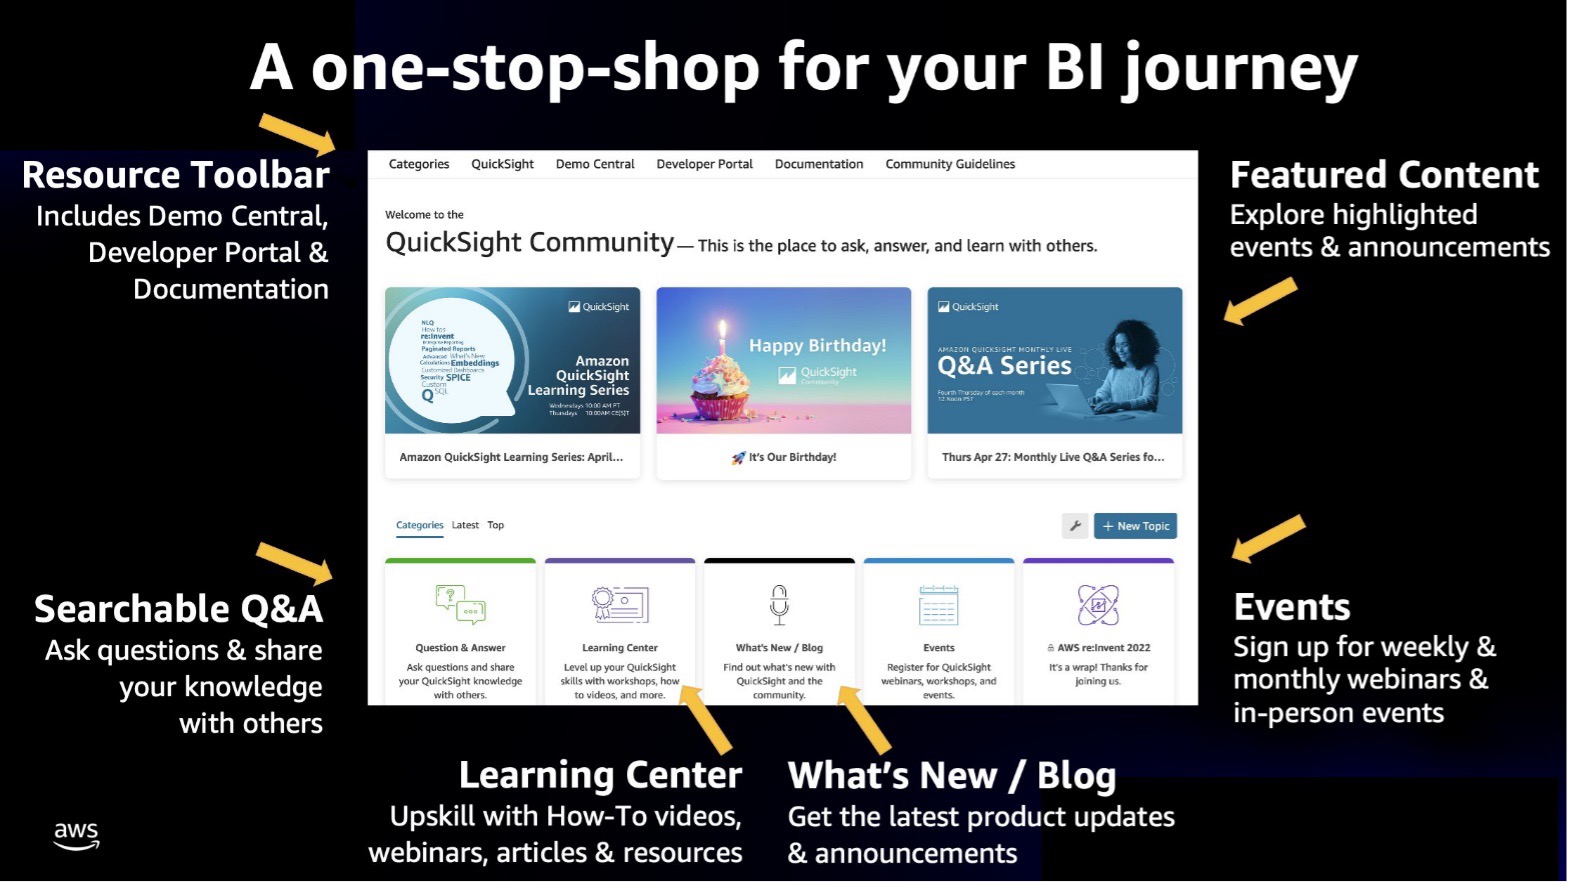 A One-Stop-Shop for your Business Intelligence journey includes resource toolbar, searchable Q&A, learning resources, what’s new, blog, events and featured content